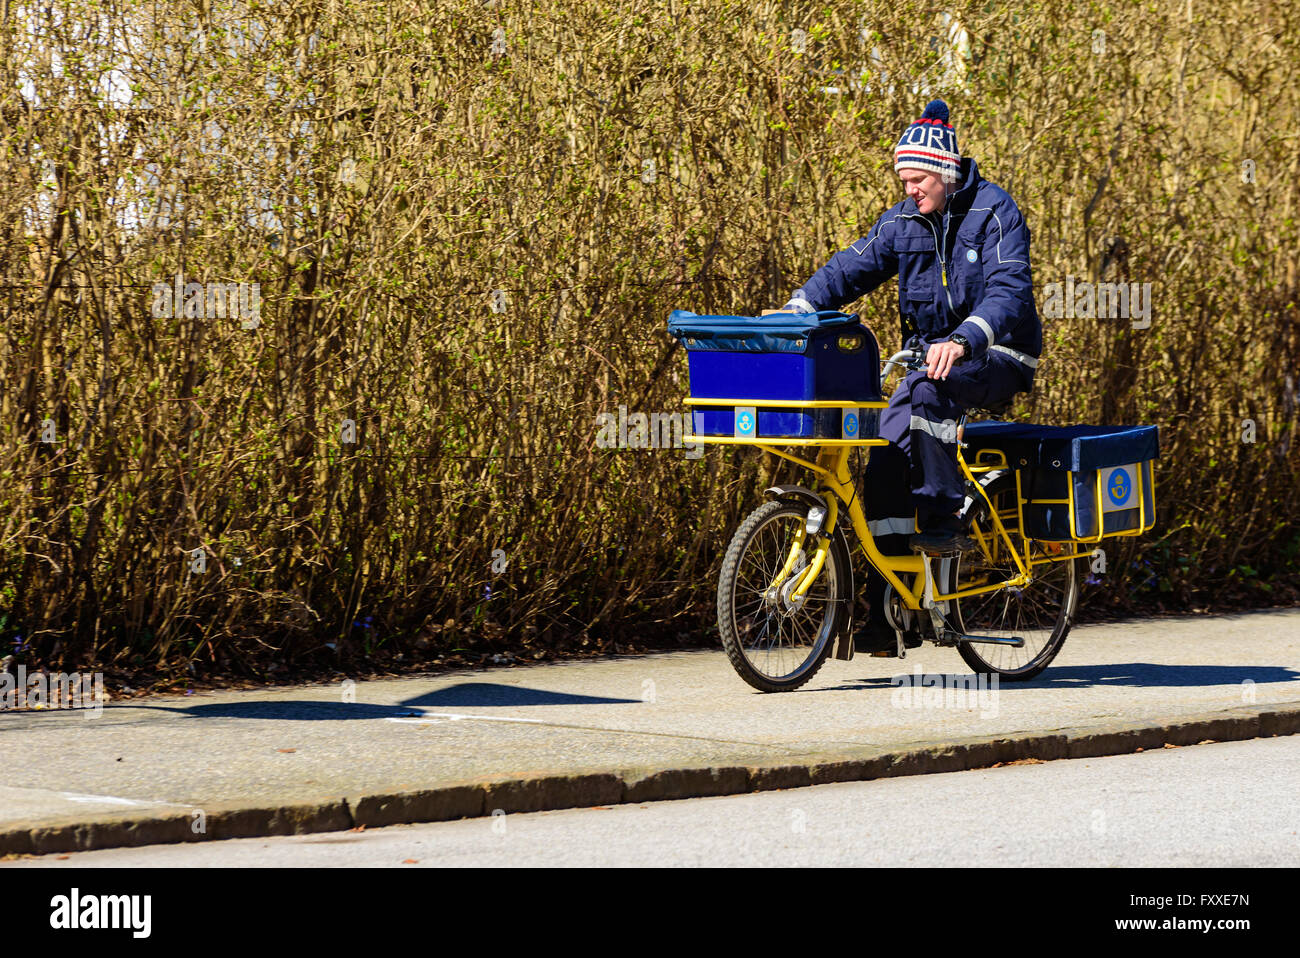 Lund, Sweden - April 11, 2016: Real life in the city. Young male postman doing his round on a bike. Stock Photo